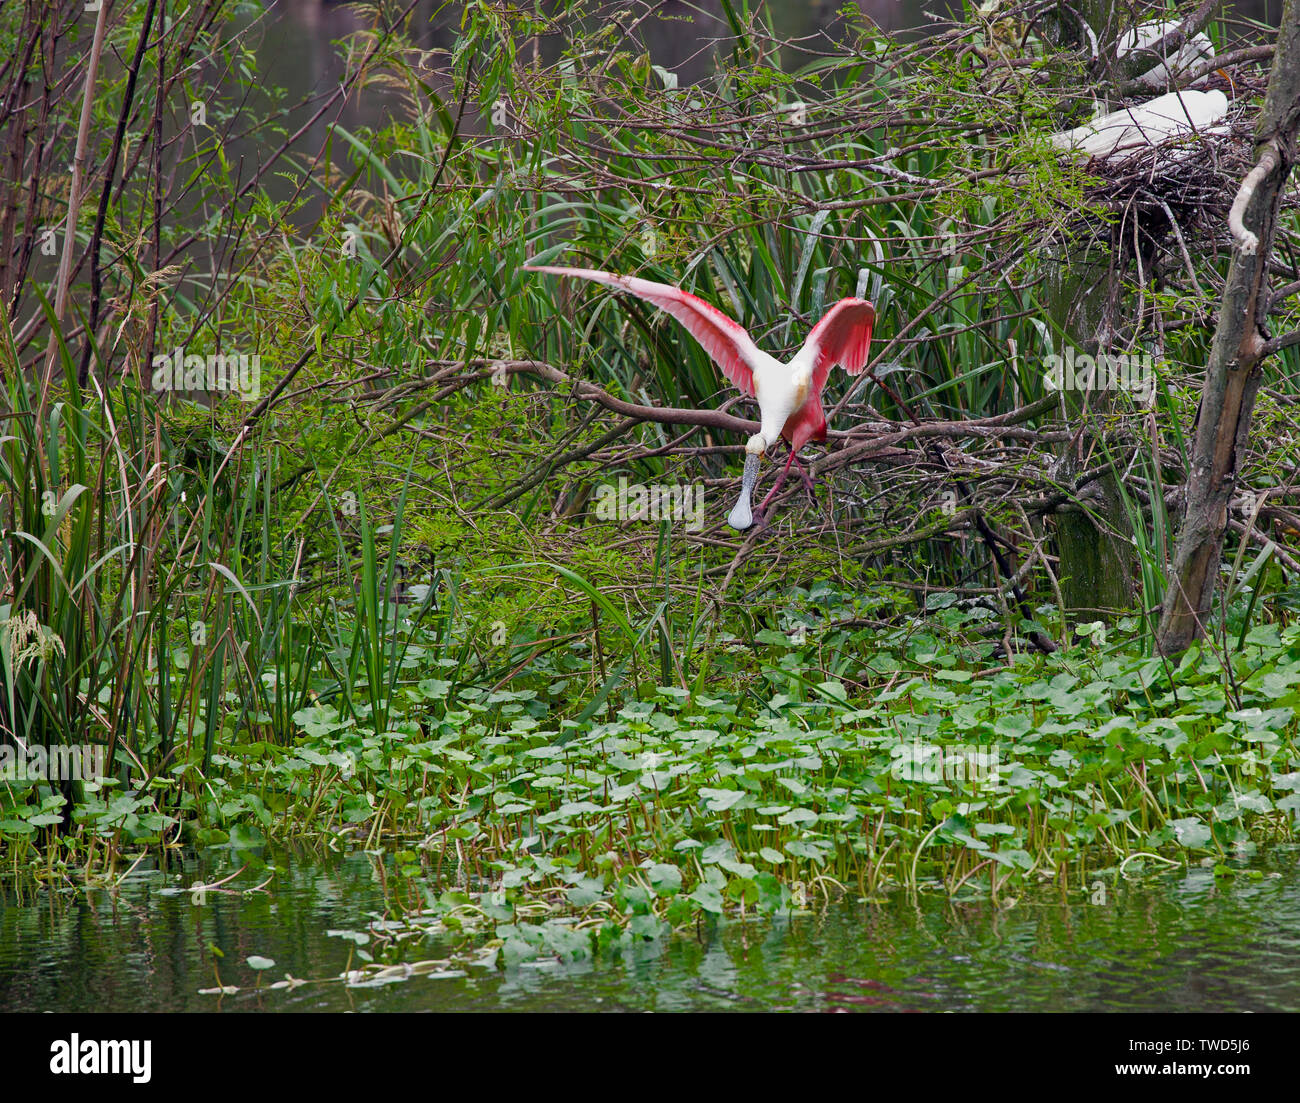 A hungry Roseate Spoonbill spots prey in the vegetation surrounding the protected rookery at Smith Oaks Bird Sanctuary, High Island, Texas. Stock Photo